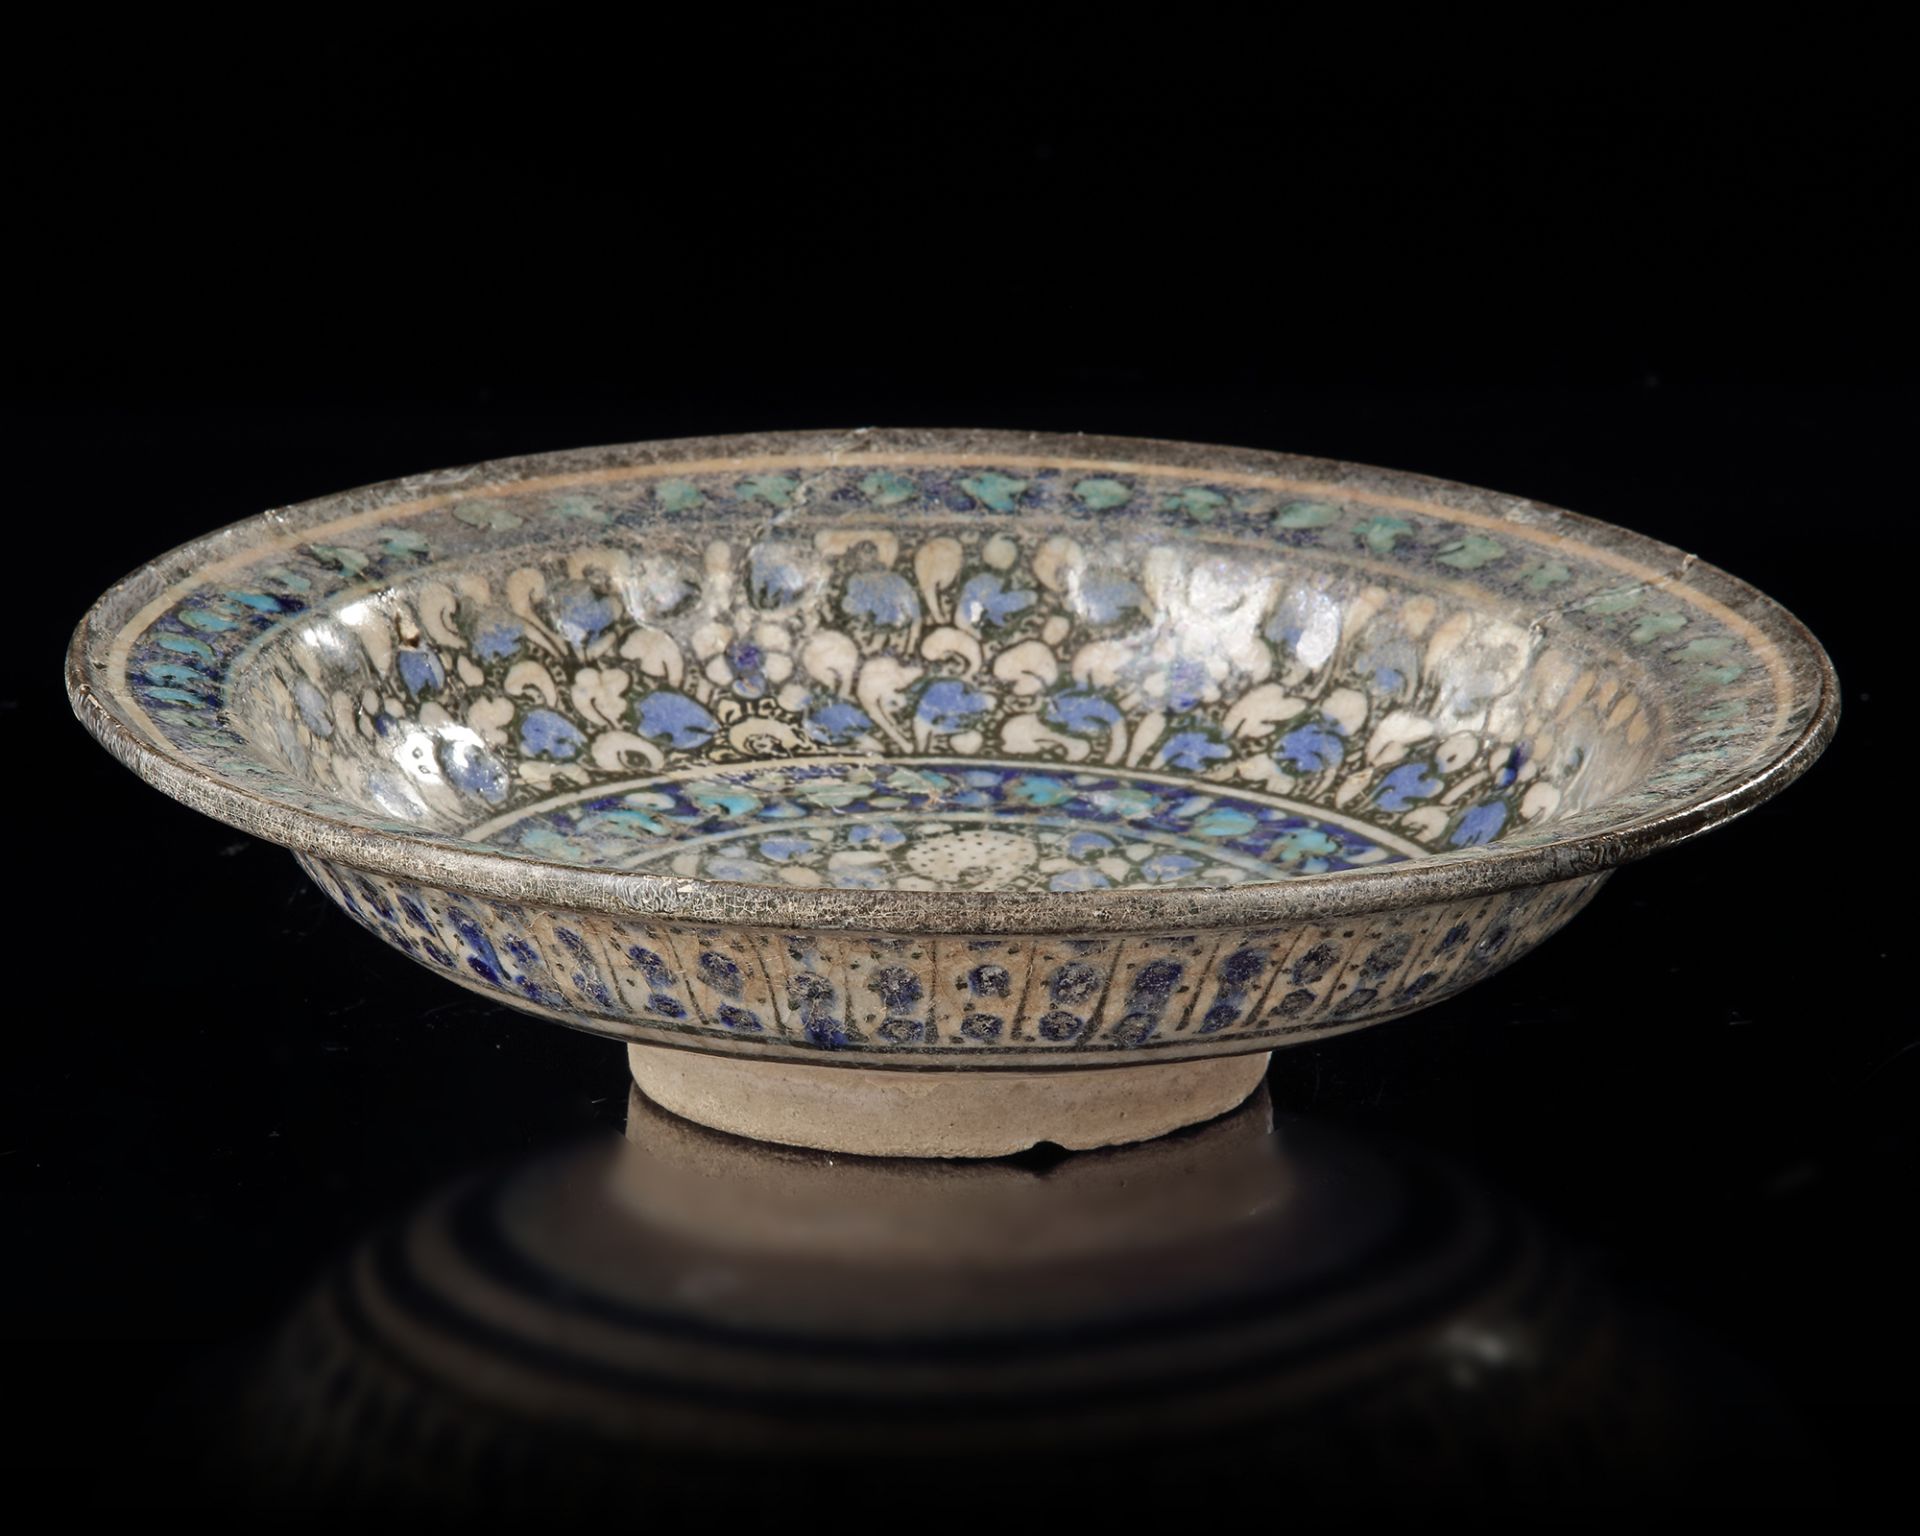 A SULTANABAD POTTERY DISH, NORTH PERSIA, LATE 13TH-EARLY 14TH CENTURY - Image 3 of 4